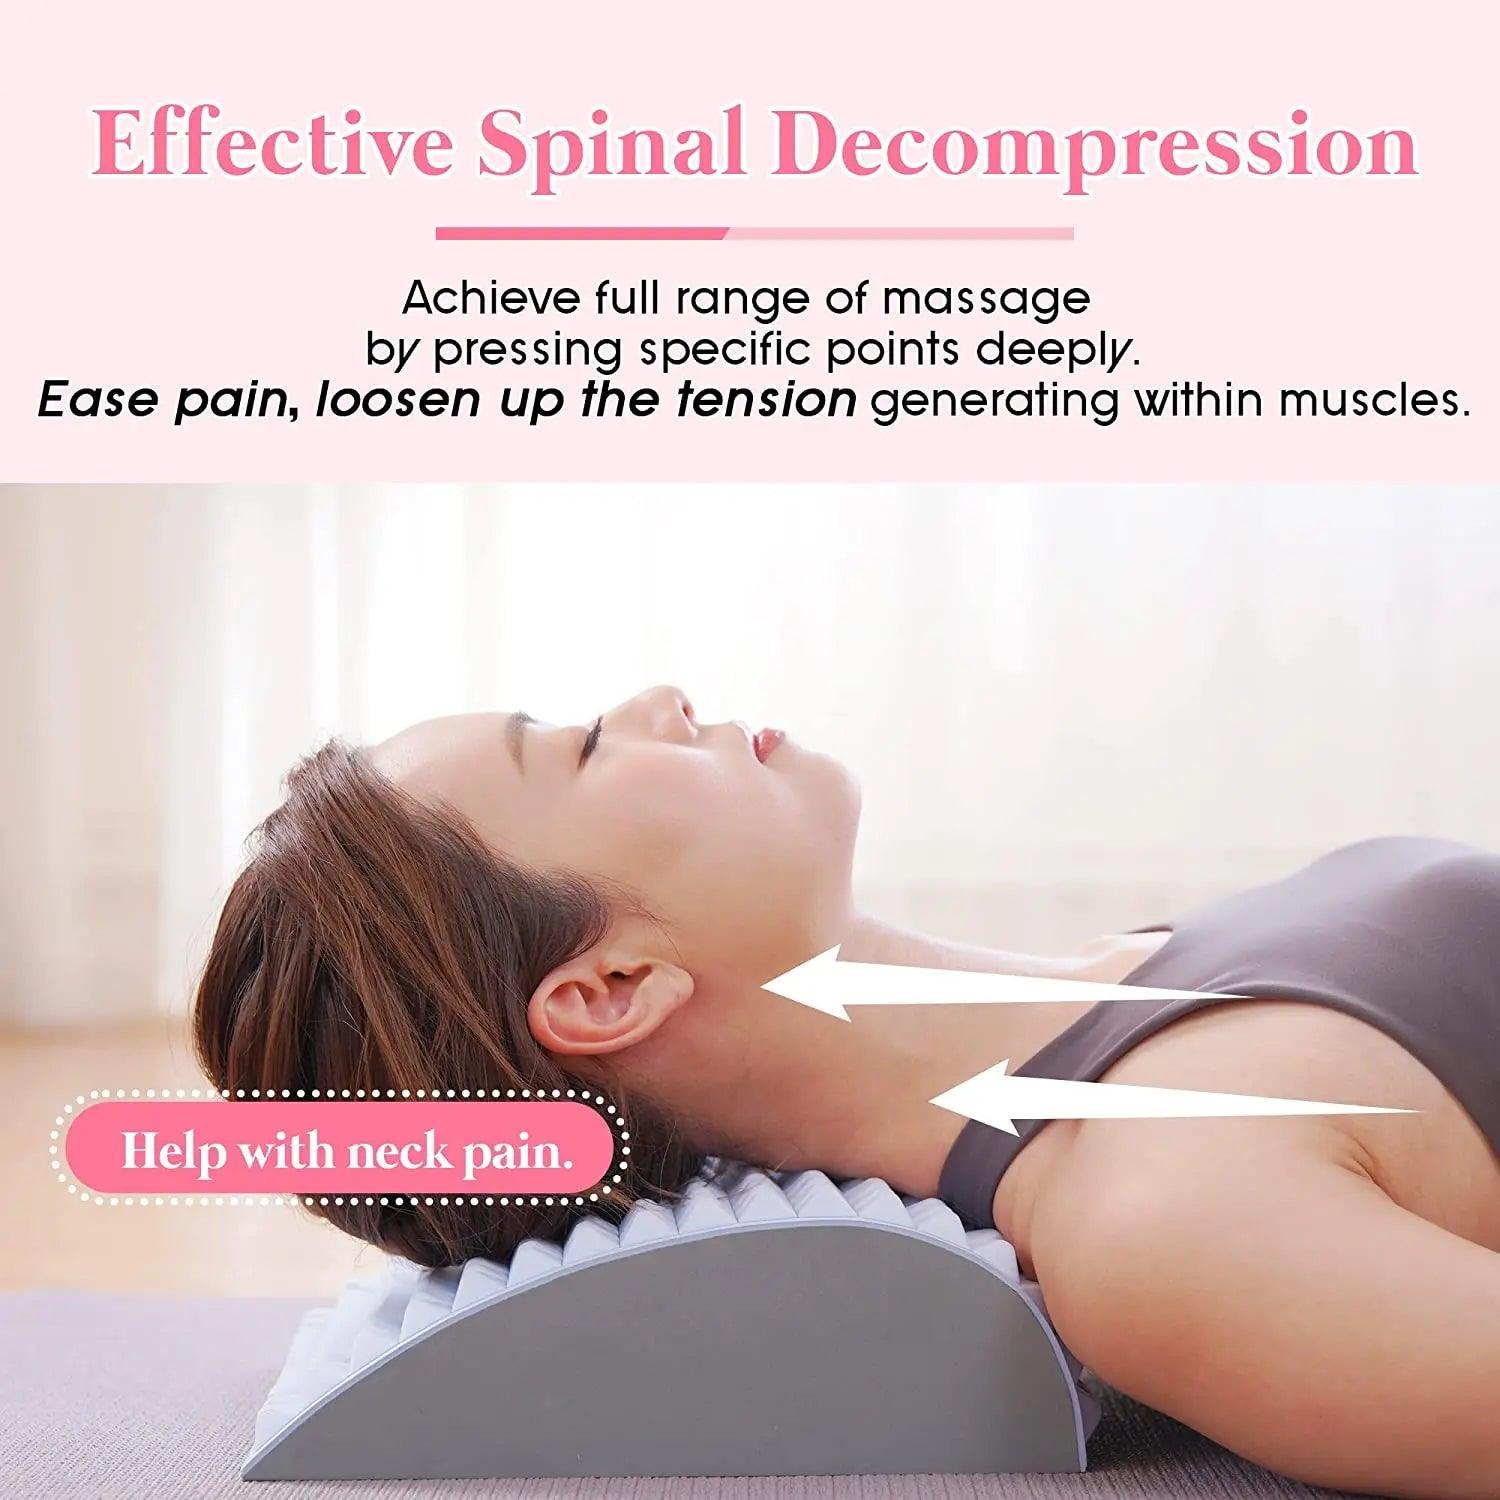 Back Pain Relief Stretcher Pillow for Lumbar Support and Posture Correction  ourlum.com   